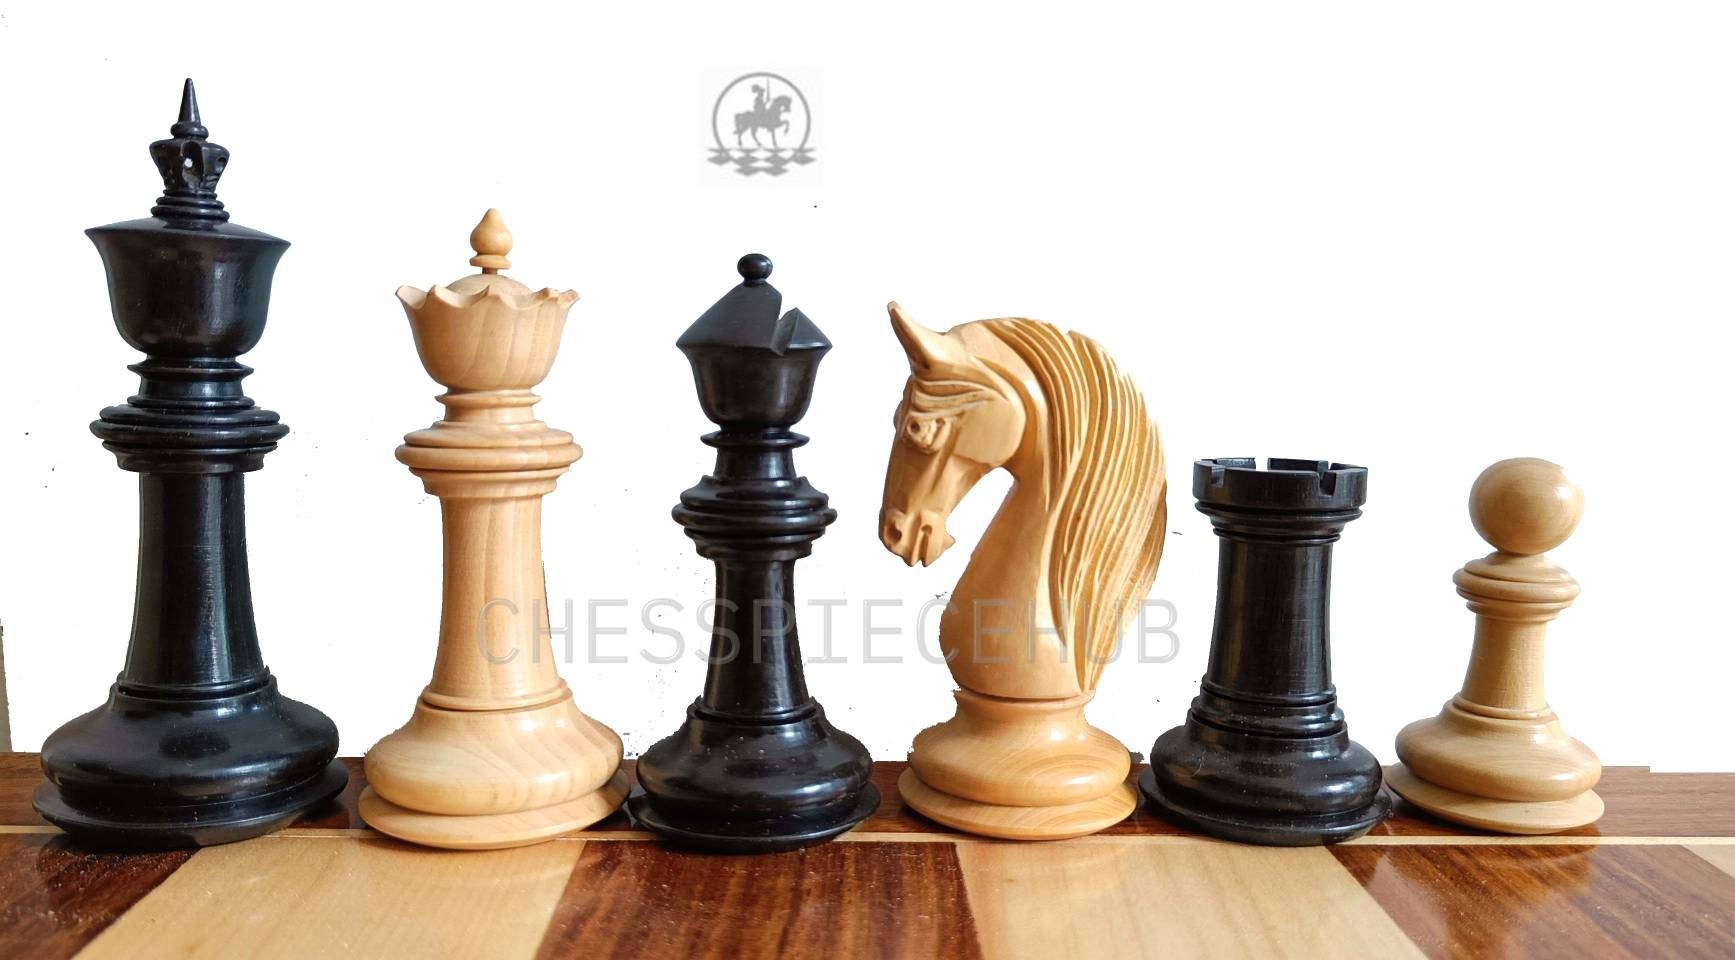 Giant Ornamental Knight - Deluxe Serial of Chess Piece for Decor - Henry  Chess Sets